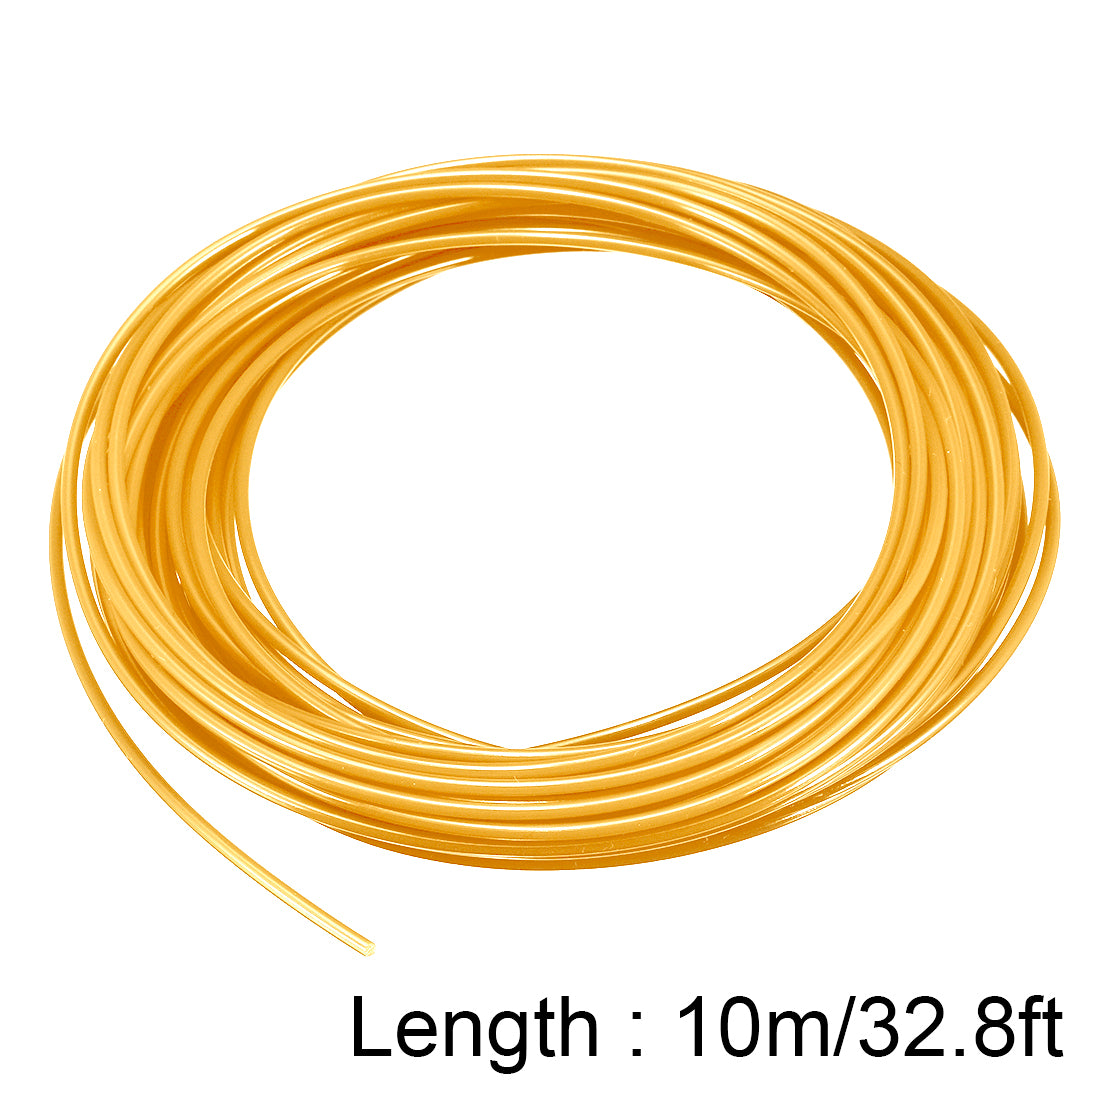 uxcell Uxcell 3D Printer Pen Filament Refills, 32.8Ft Length, 1.75 mm Dia, PLA, Dimensional Accuracy +/- 0.02mm, for 3D Painting and Drawing,Gold Tone